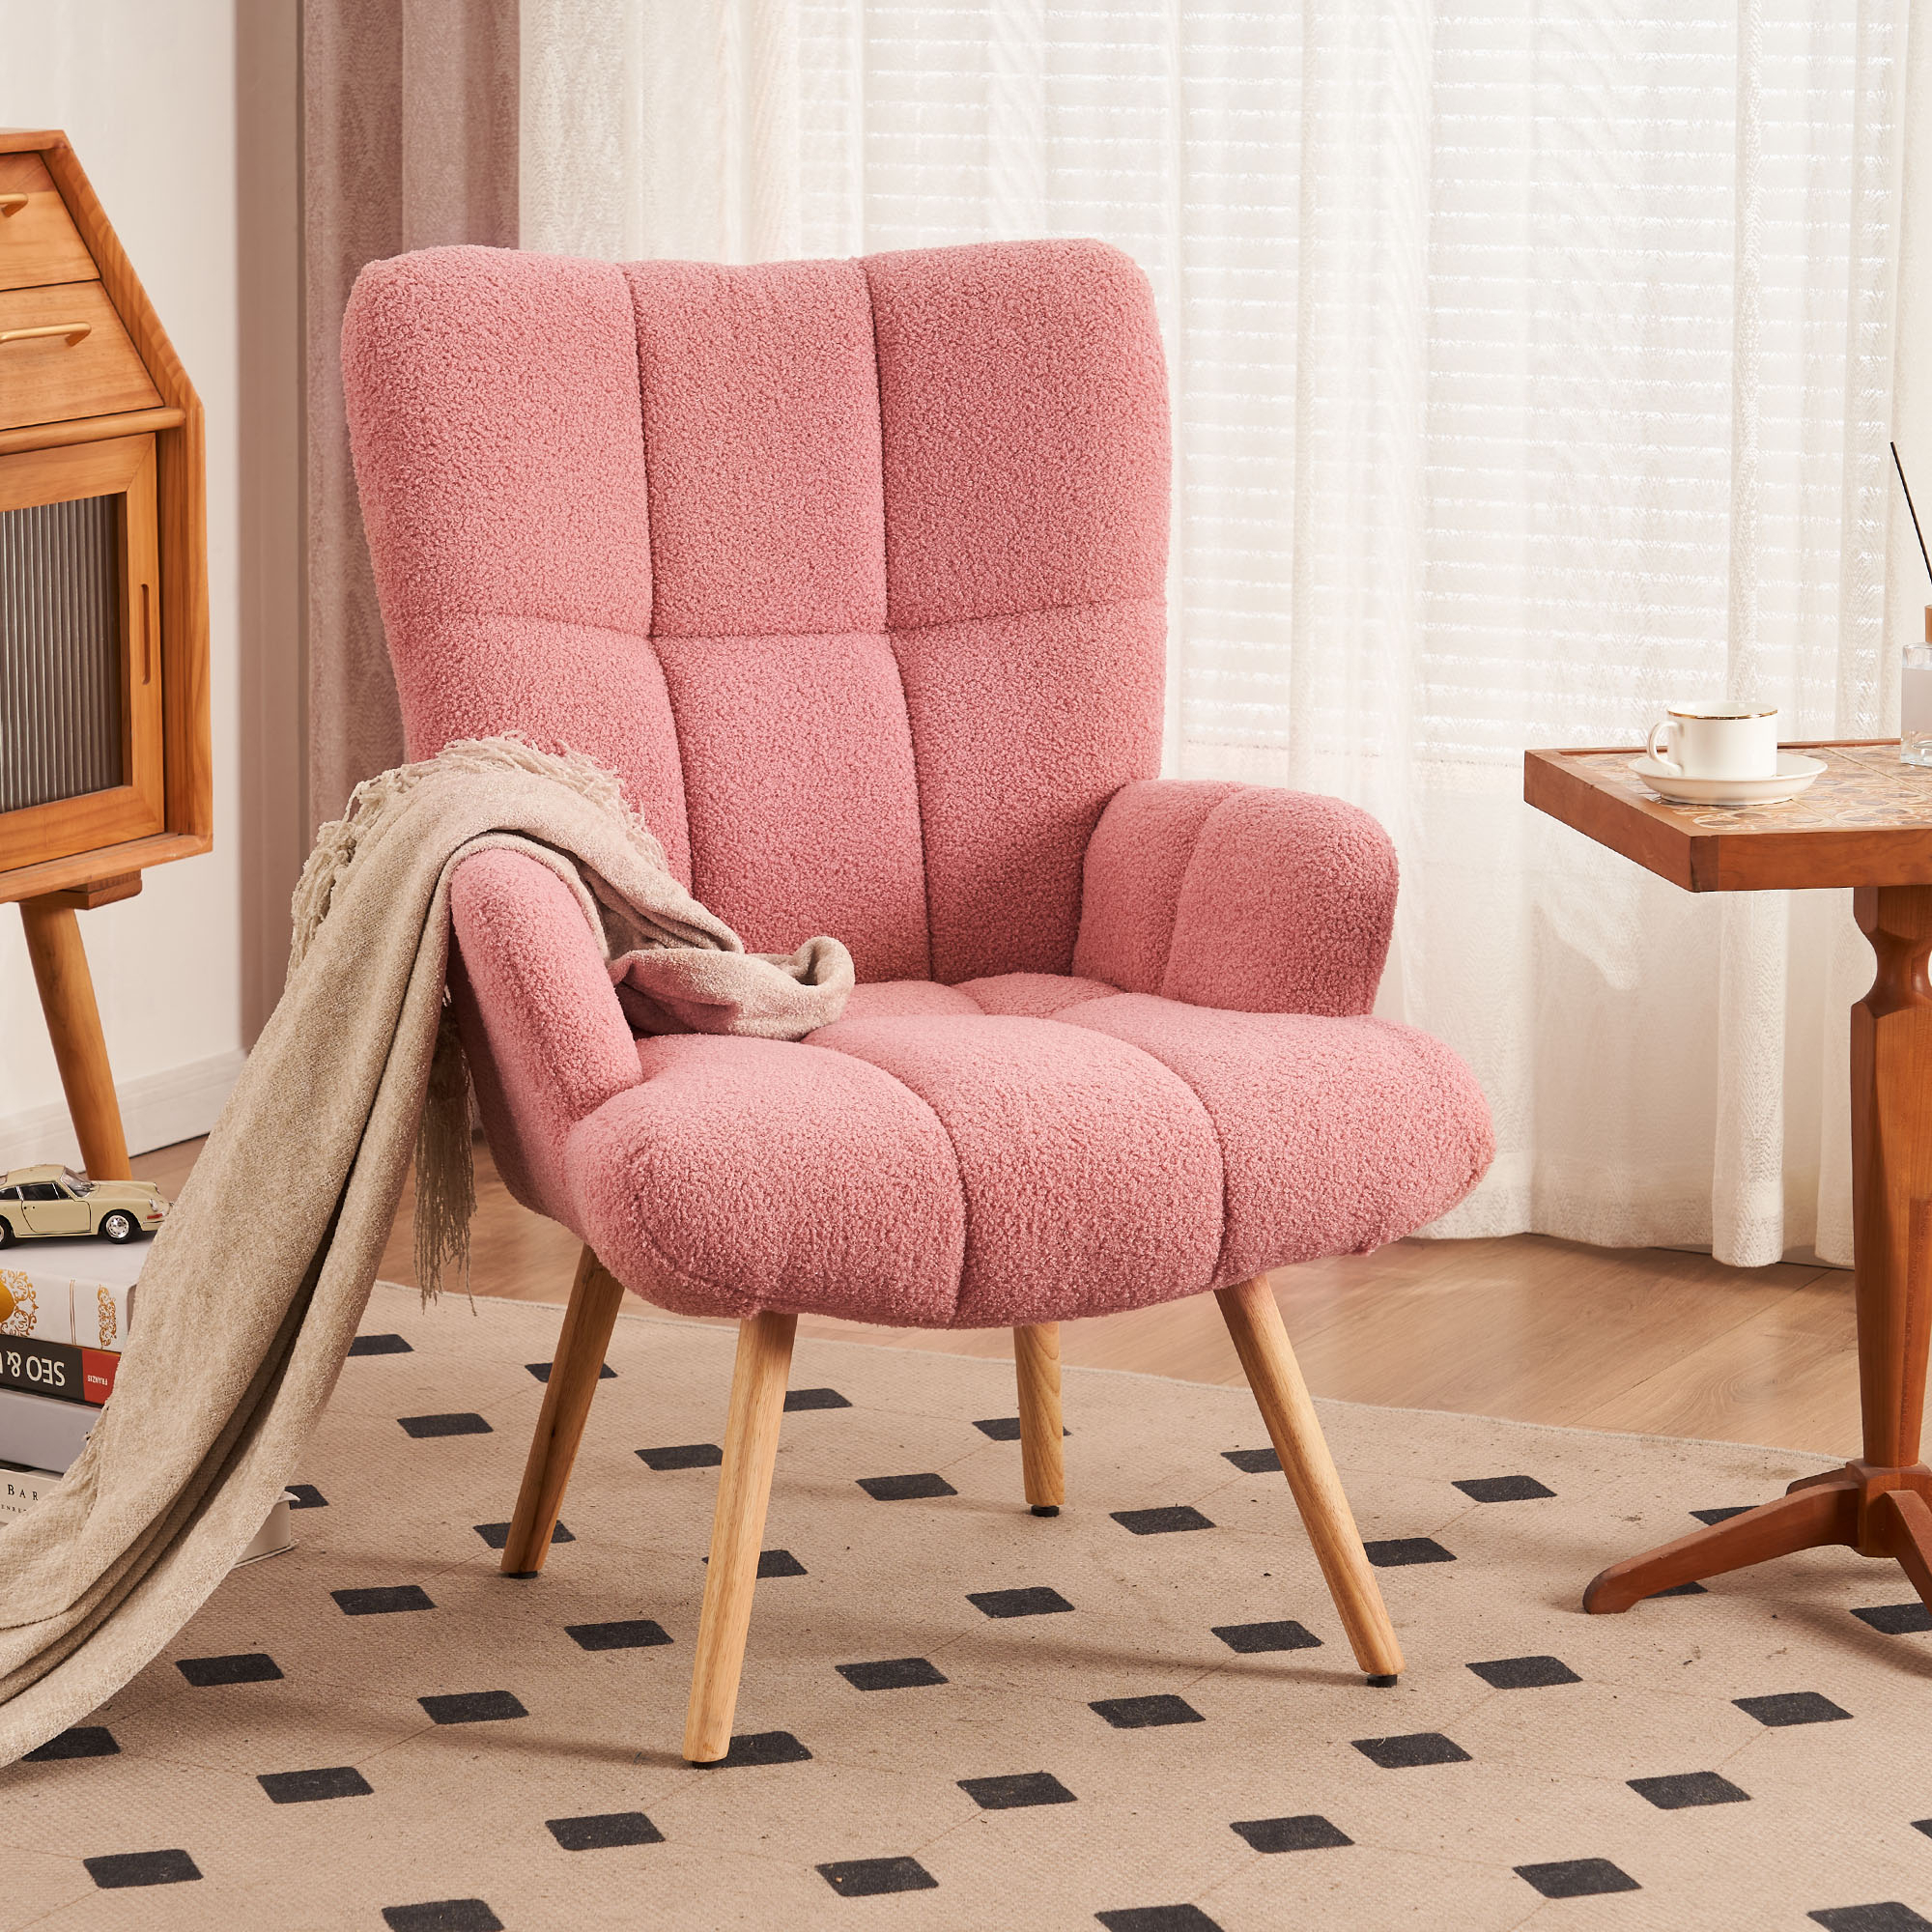 Teddy Velvet Accent Chair, Teddy Furry Casual Chair With High Back And Soft Padded, Modern Armchair Chair - Pink